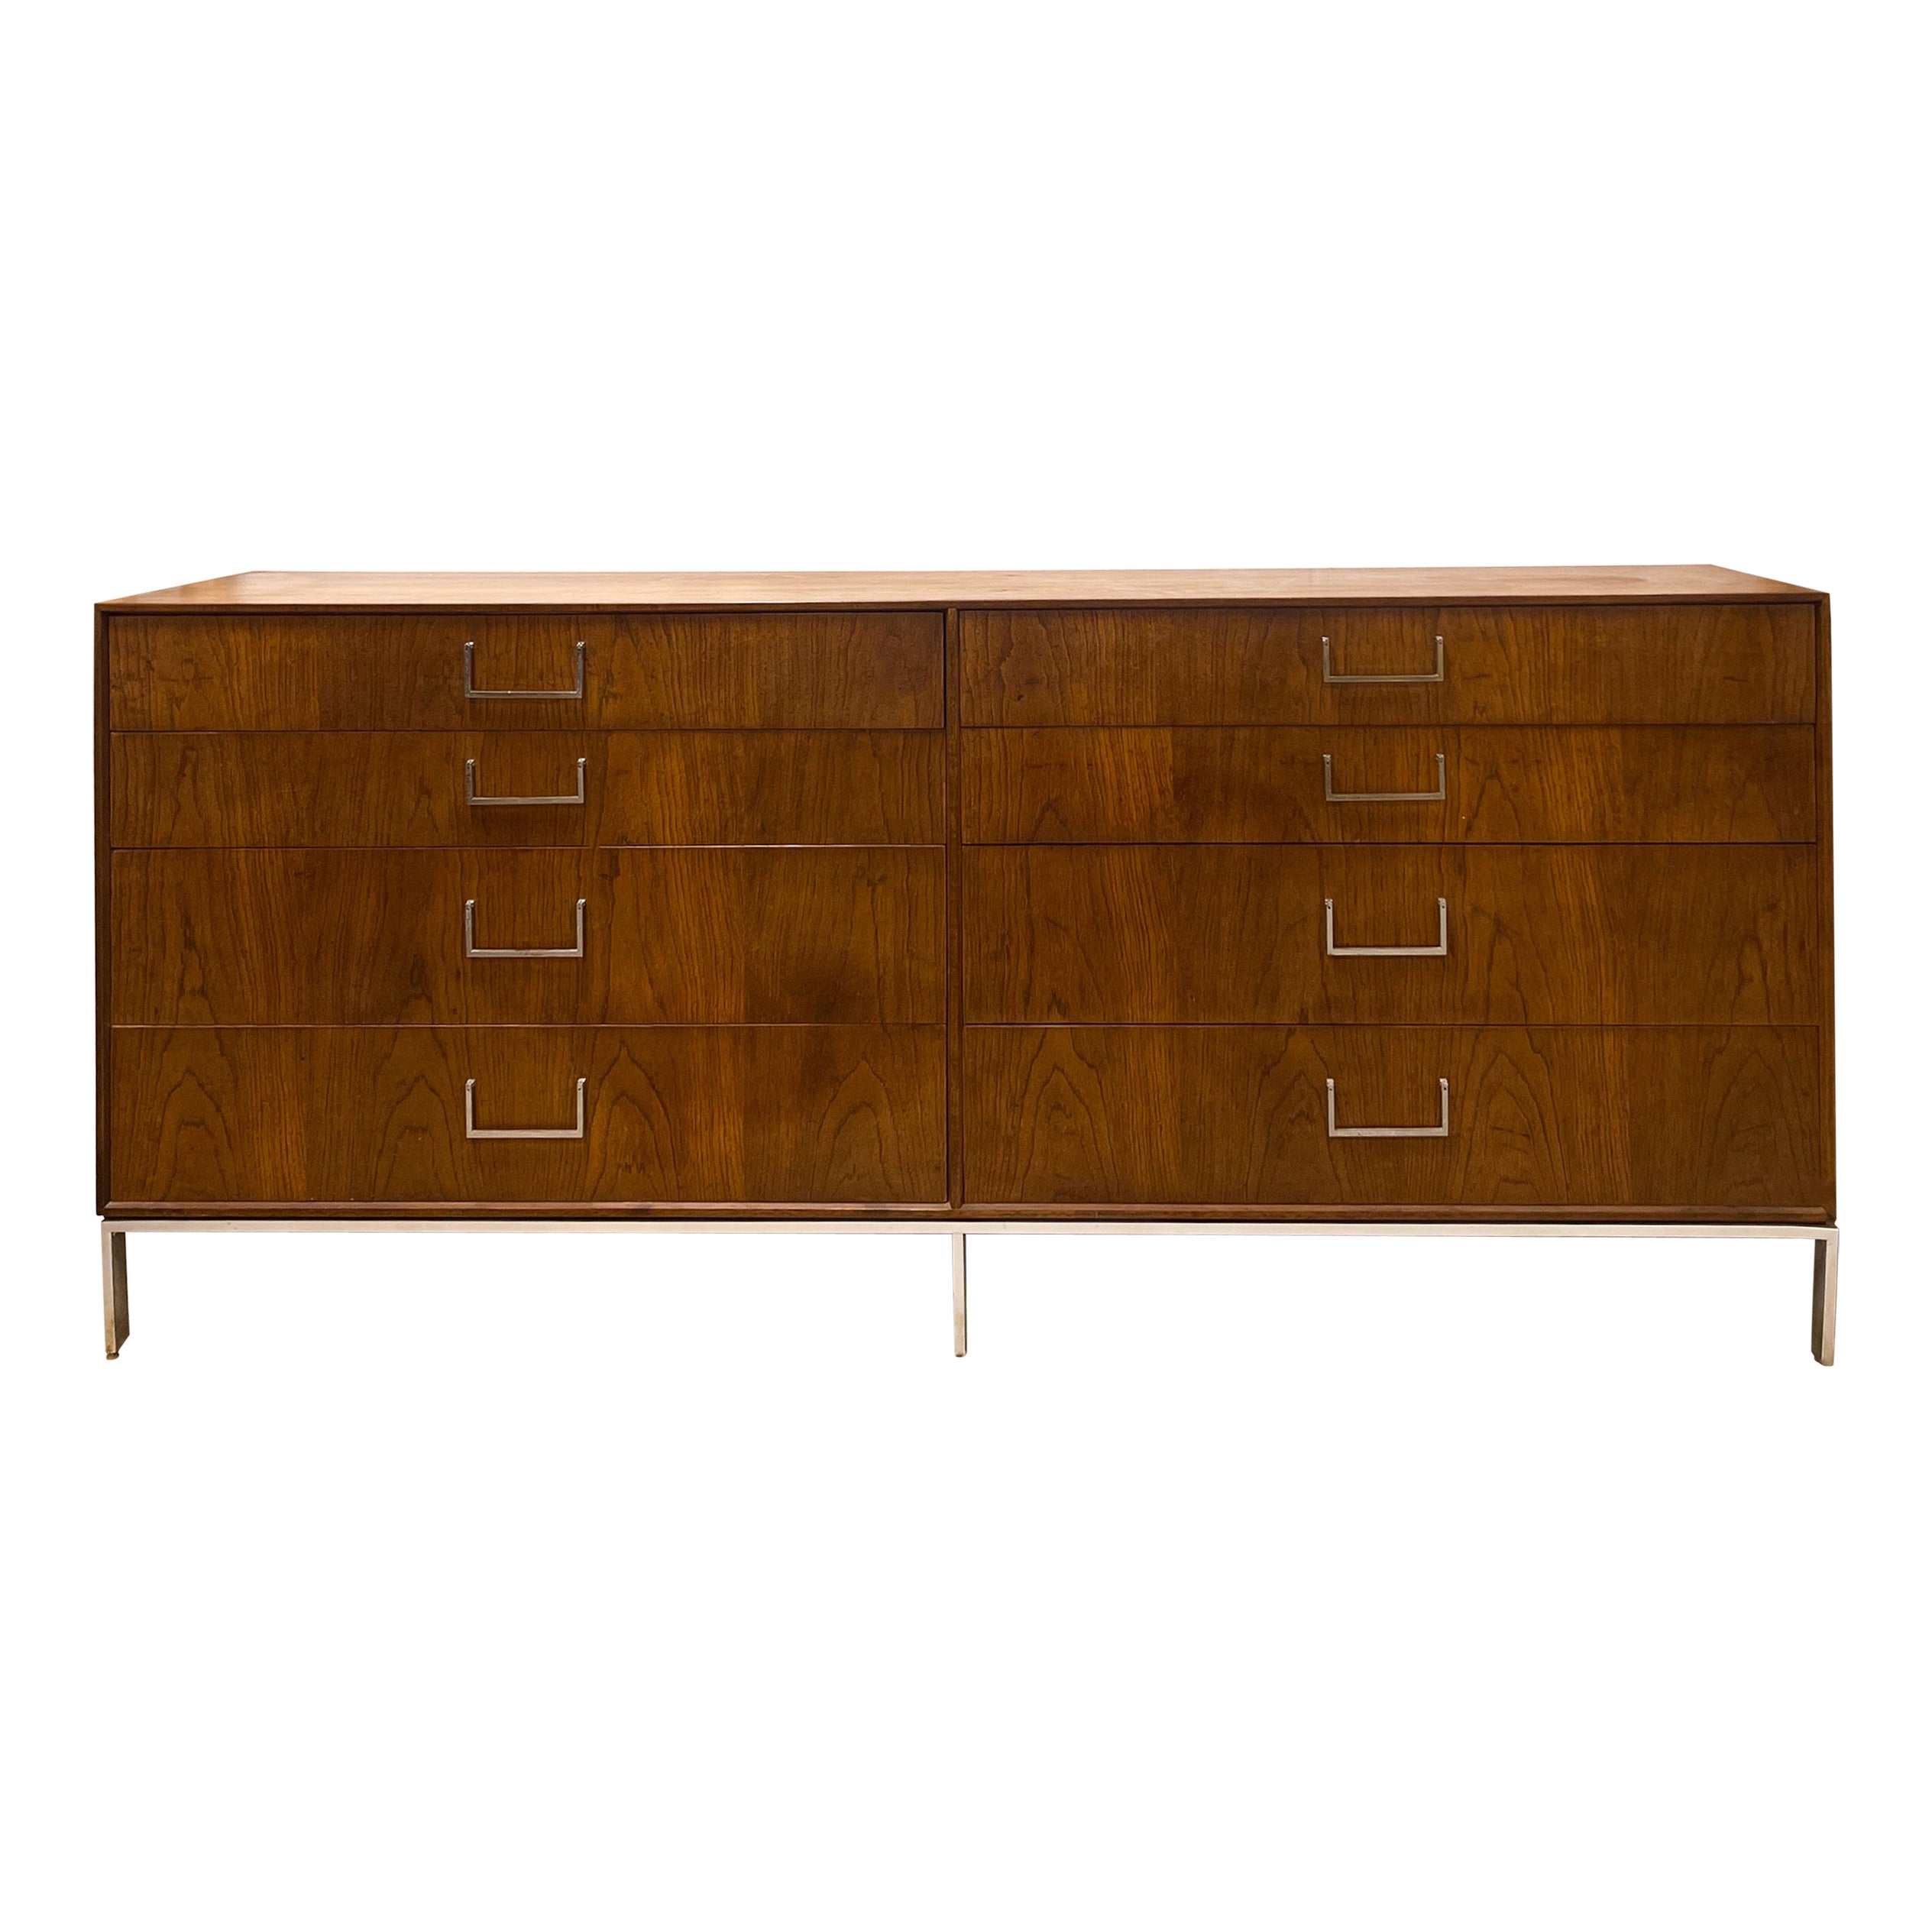 Mid-Century Modern Walnut Credenza / Chest of Drawers Att. to Florence Knoll For Sale